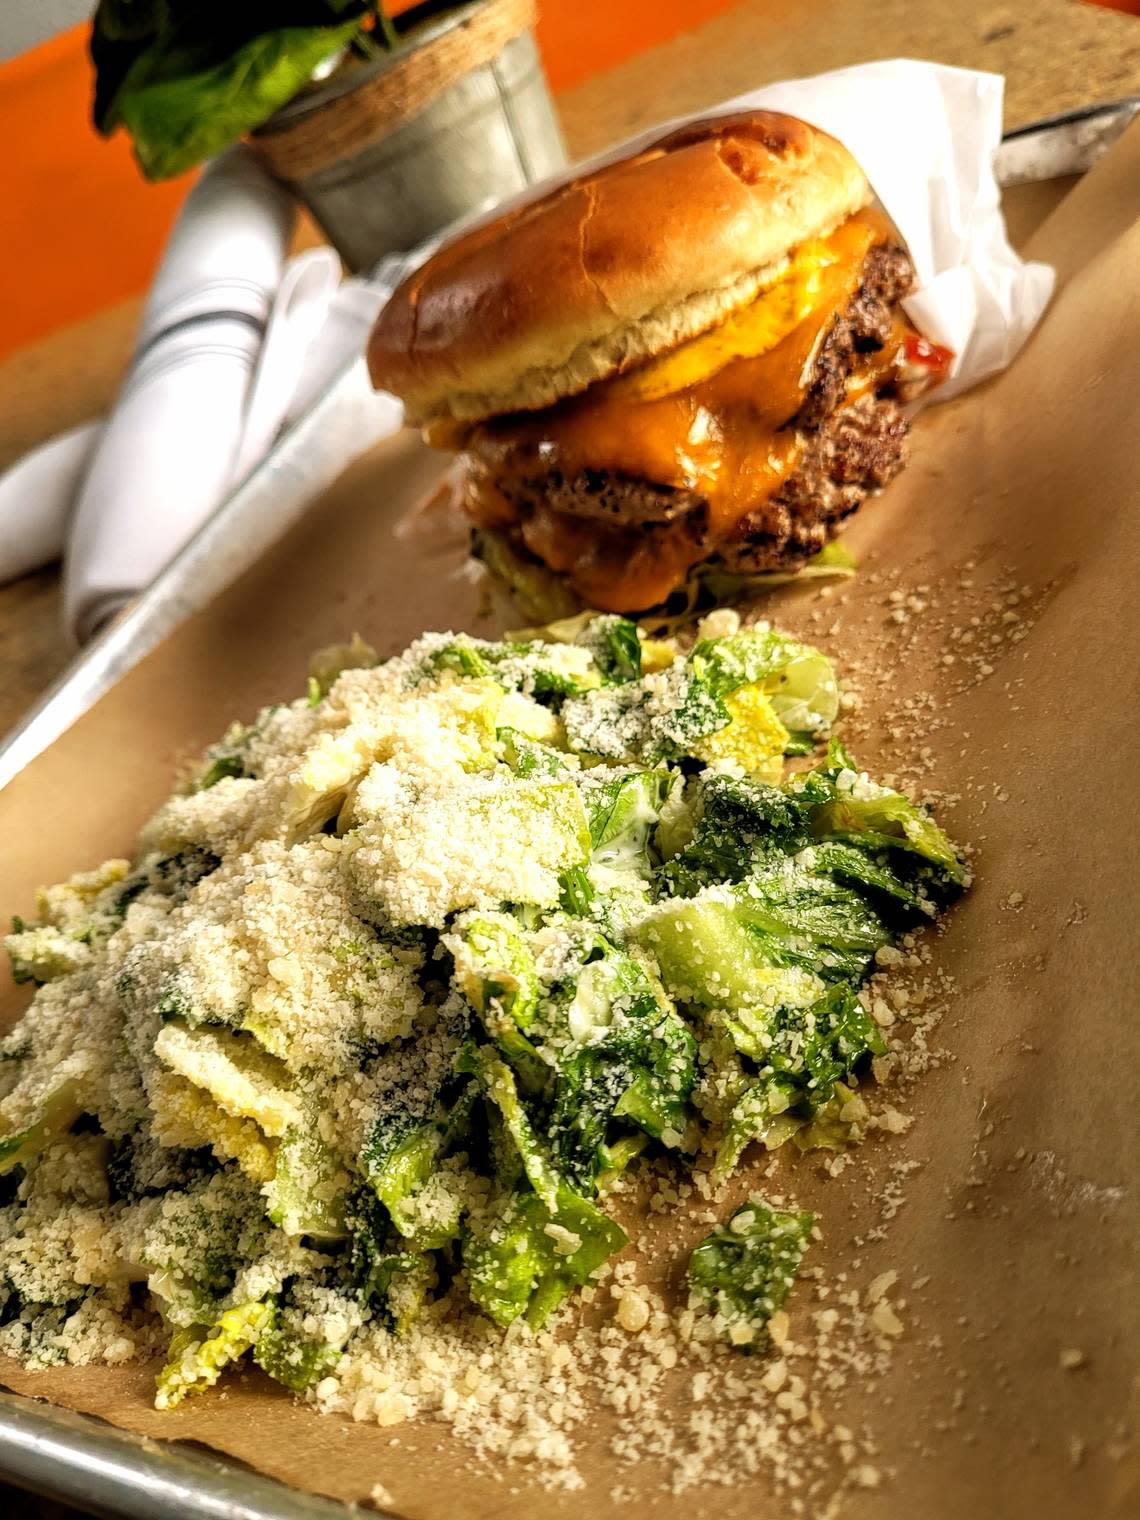 A Brisket Cheeseburger pairs nicely with the restaurant’s parmesan-topped Garlicky Romaine Salad.